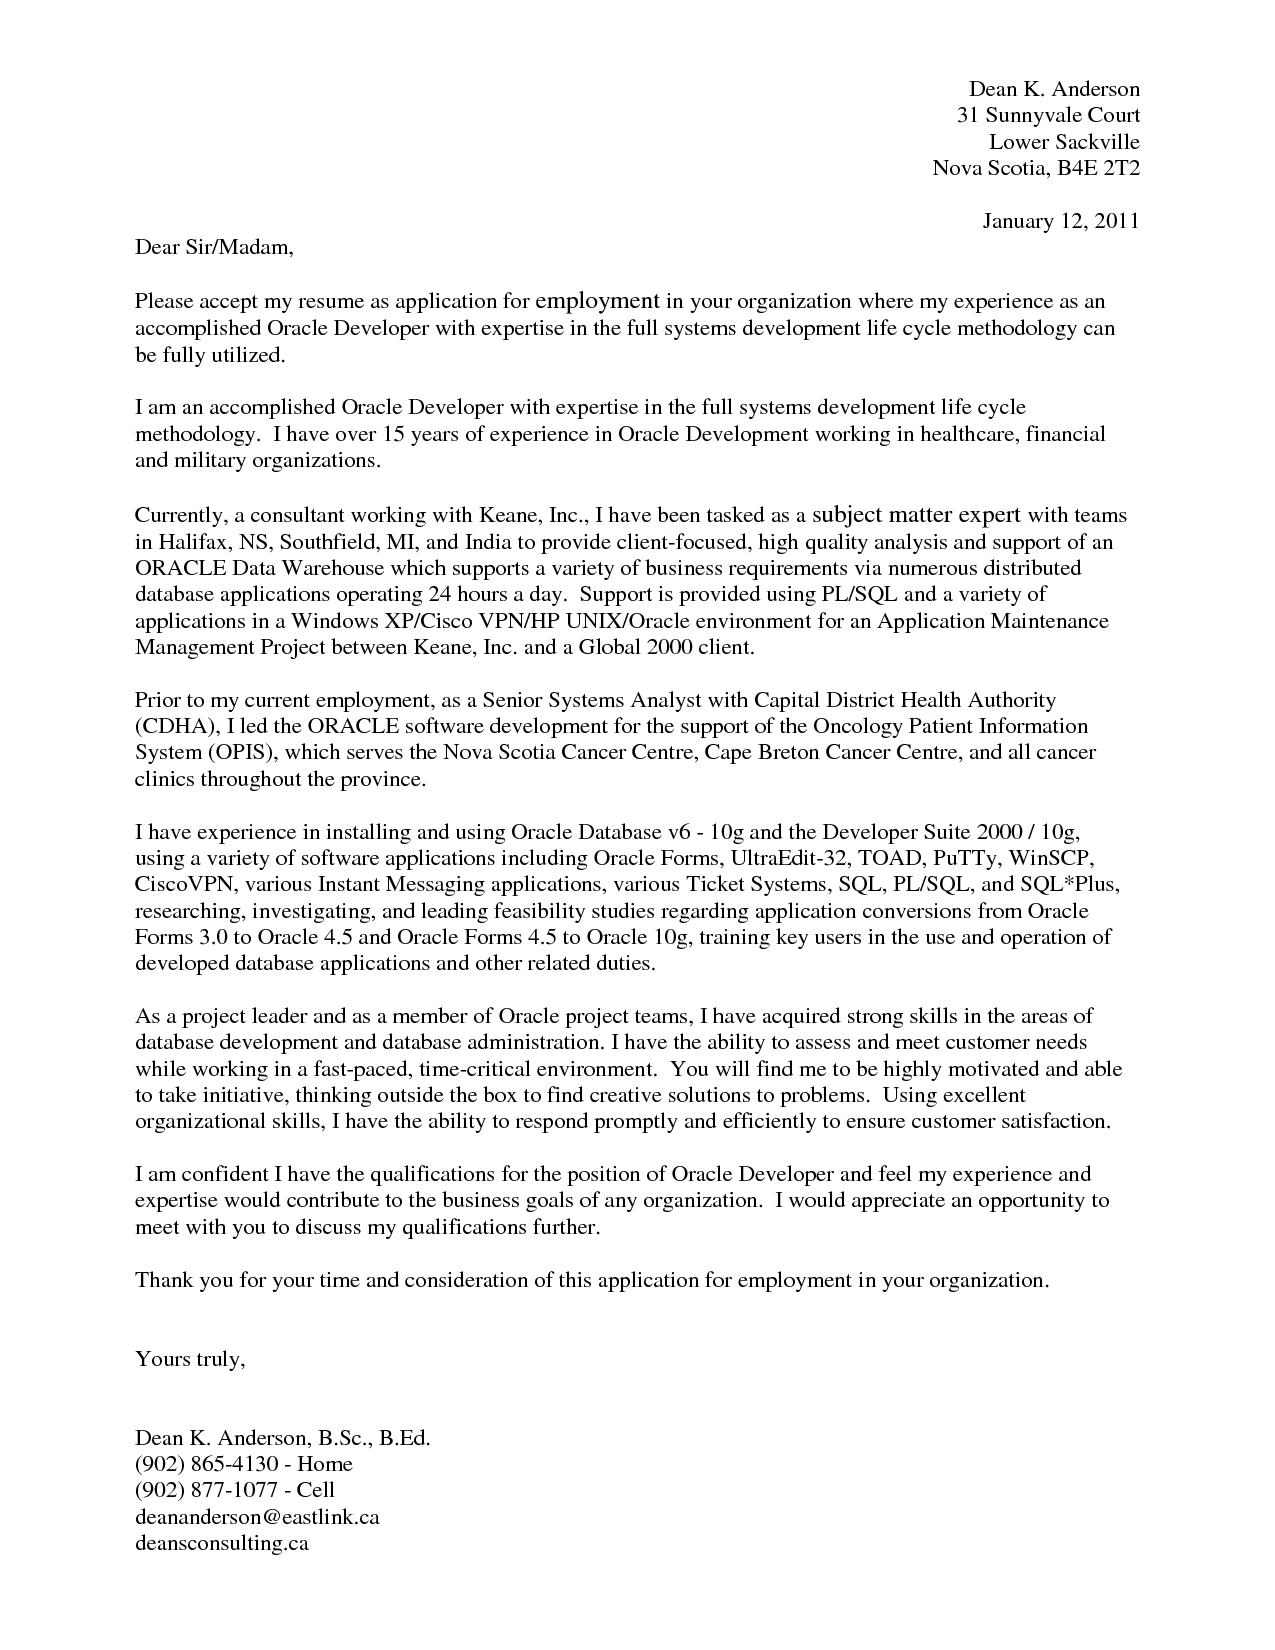 cover letter template healthcare example-healthcare consulting cover letter 2-d